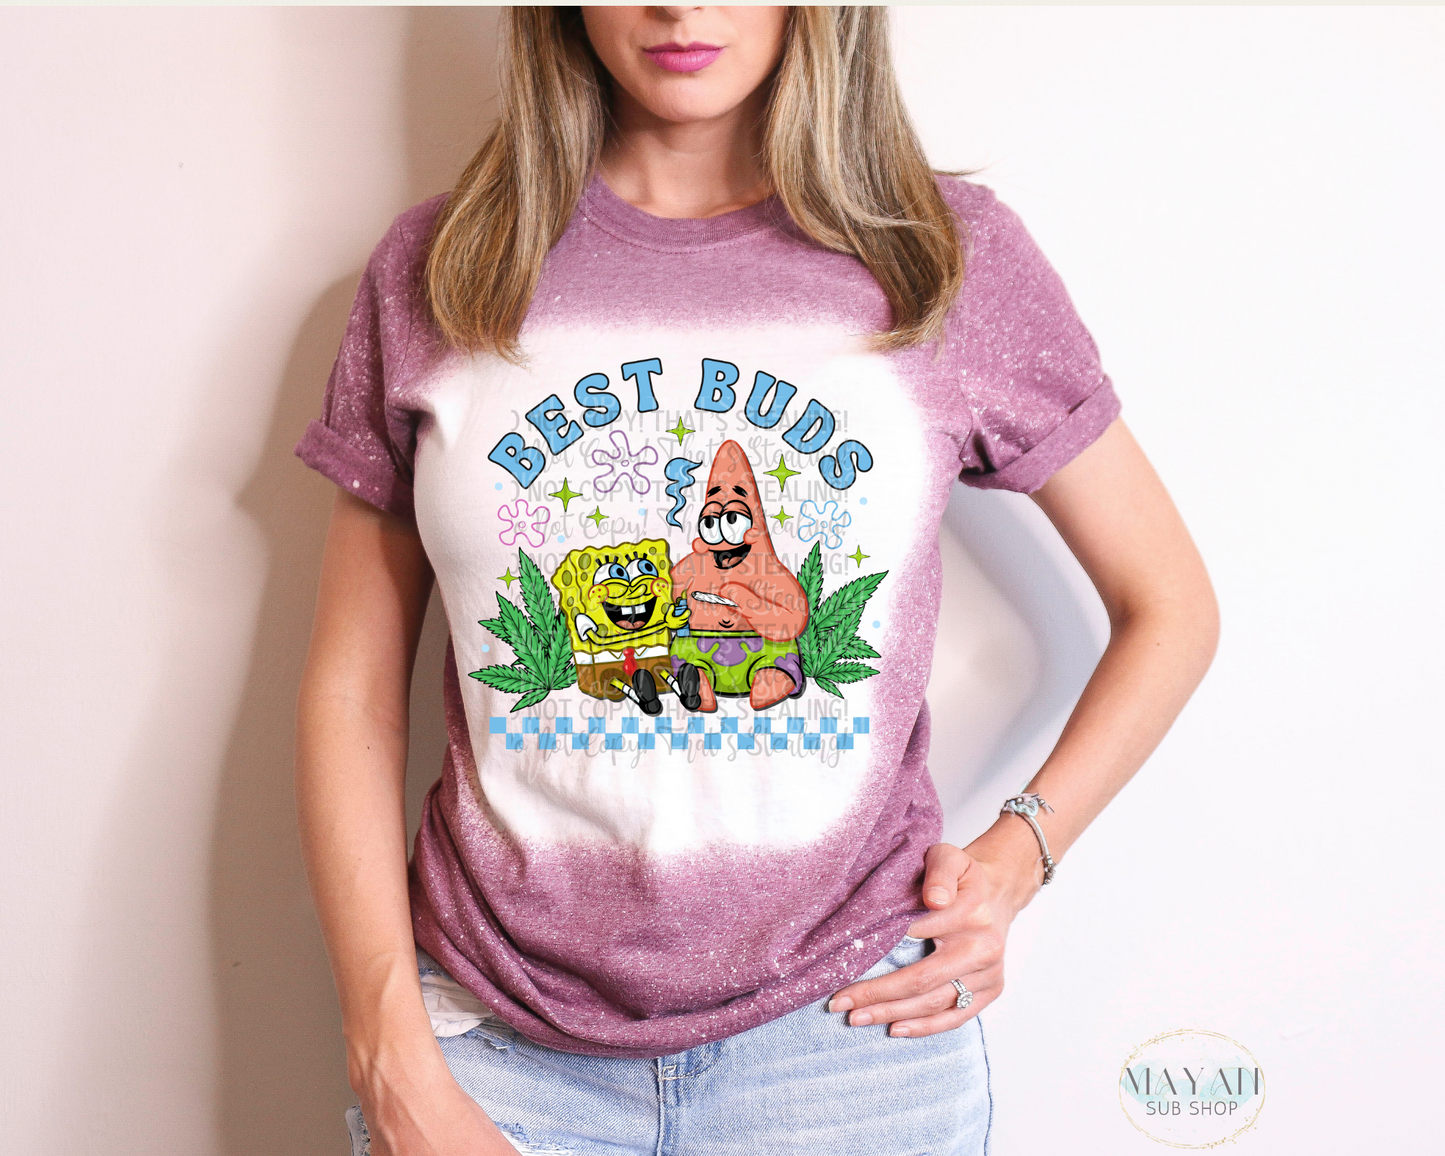 Best Buds Bleached Tee - Mayan Sub Shop